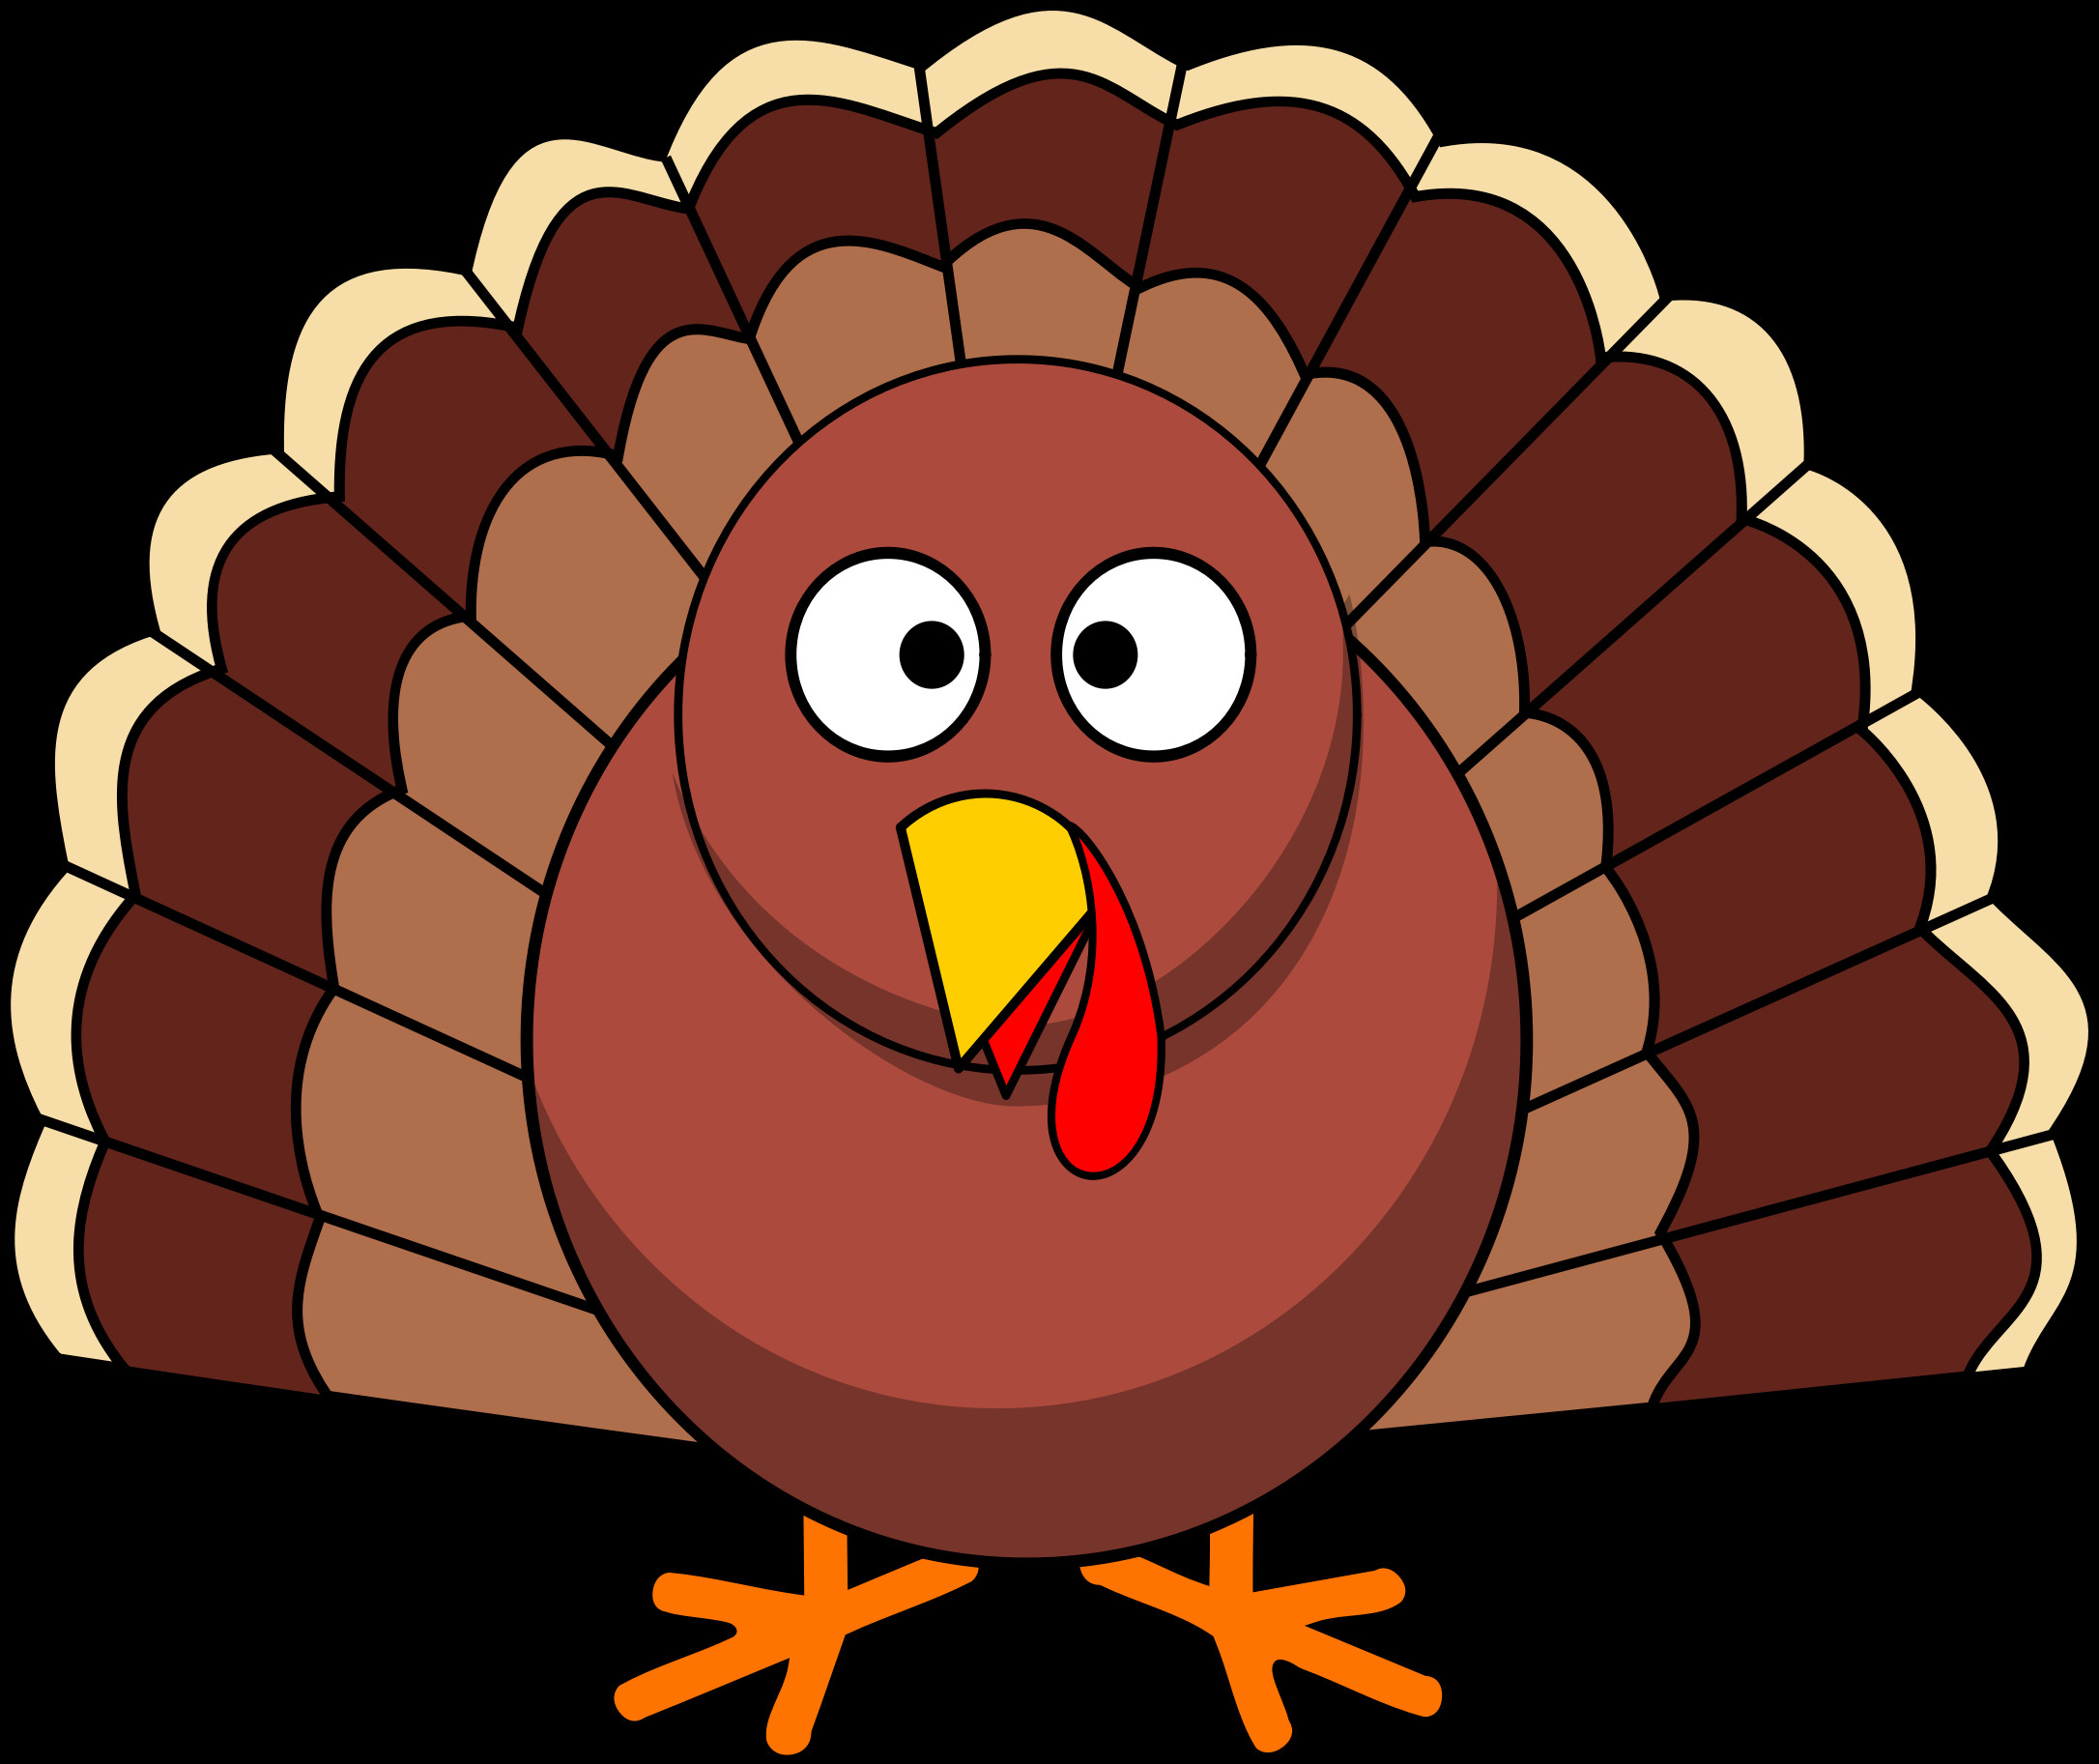 Cartoon Picture Of Turkey For Thanksgiving
 Cartoon Turkey Clipart Clipart Suggest